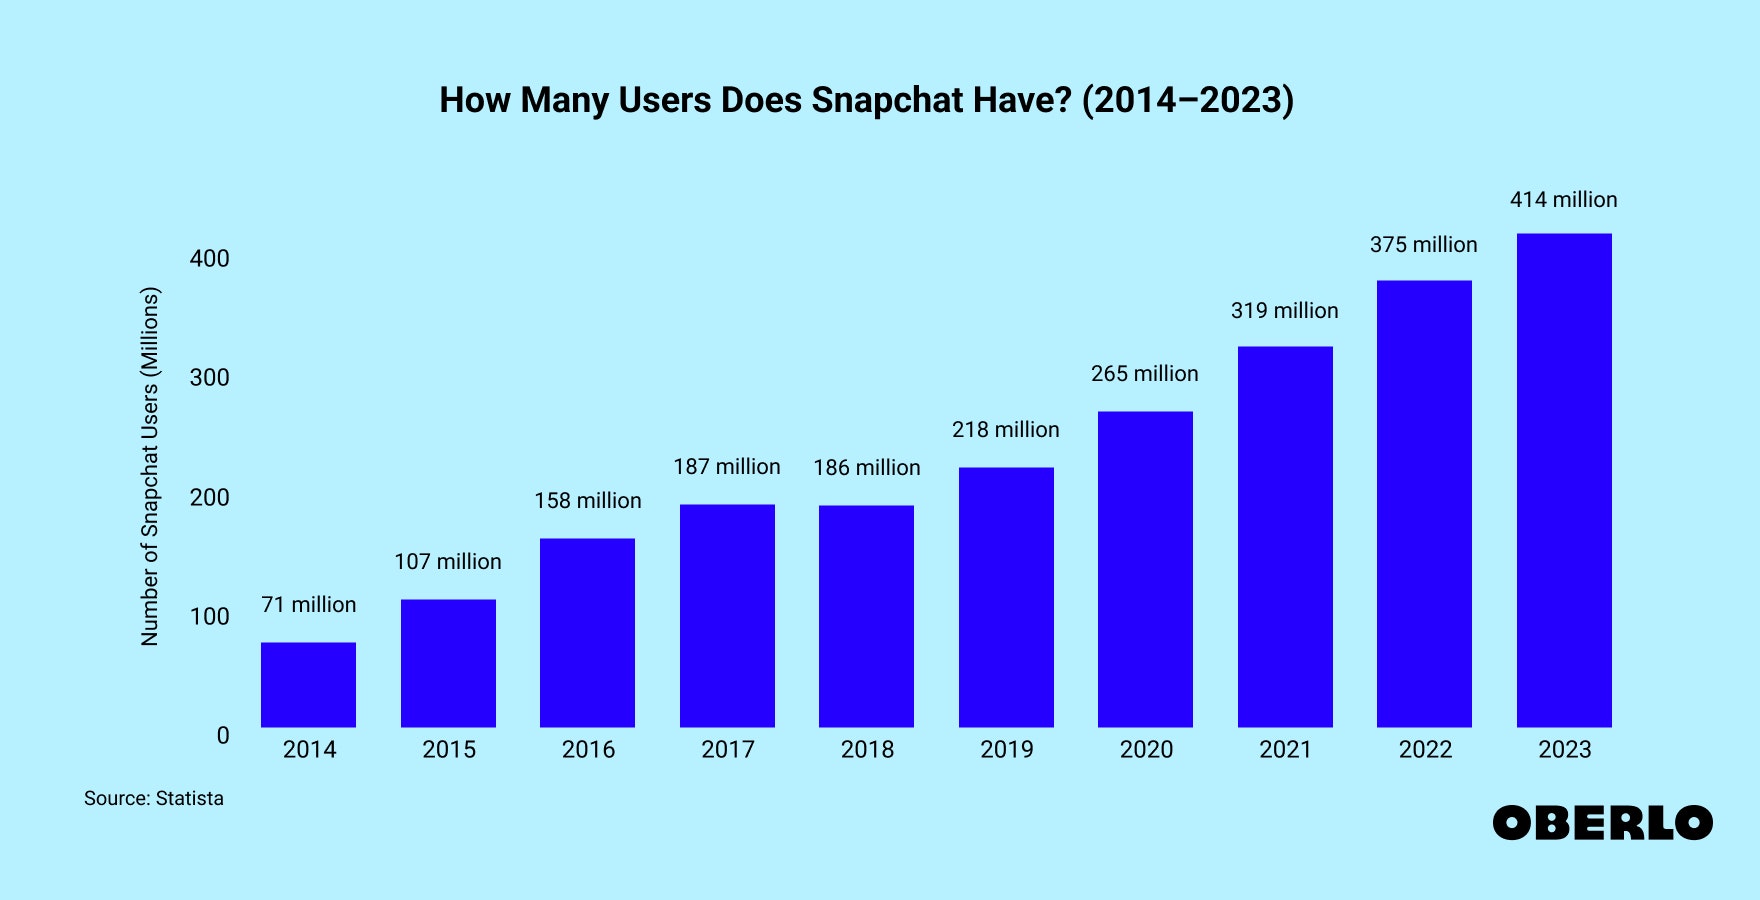 Chart shwoing the number of Snapchat users from 2014 to 2023